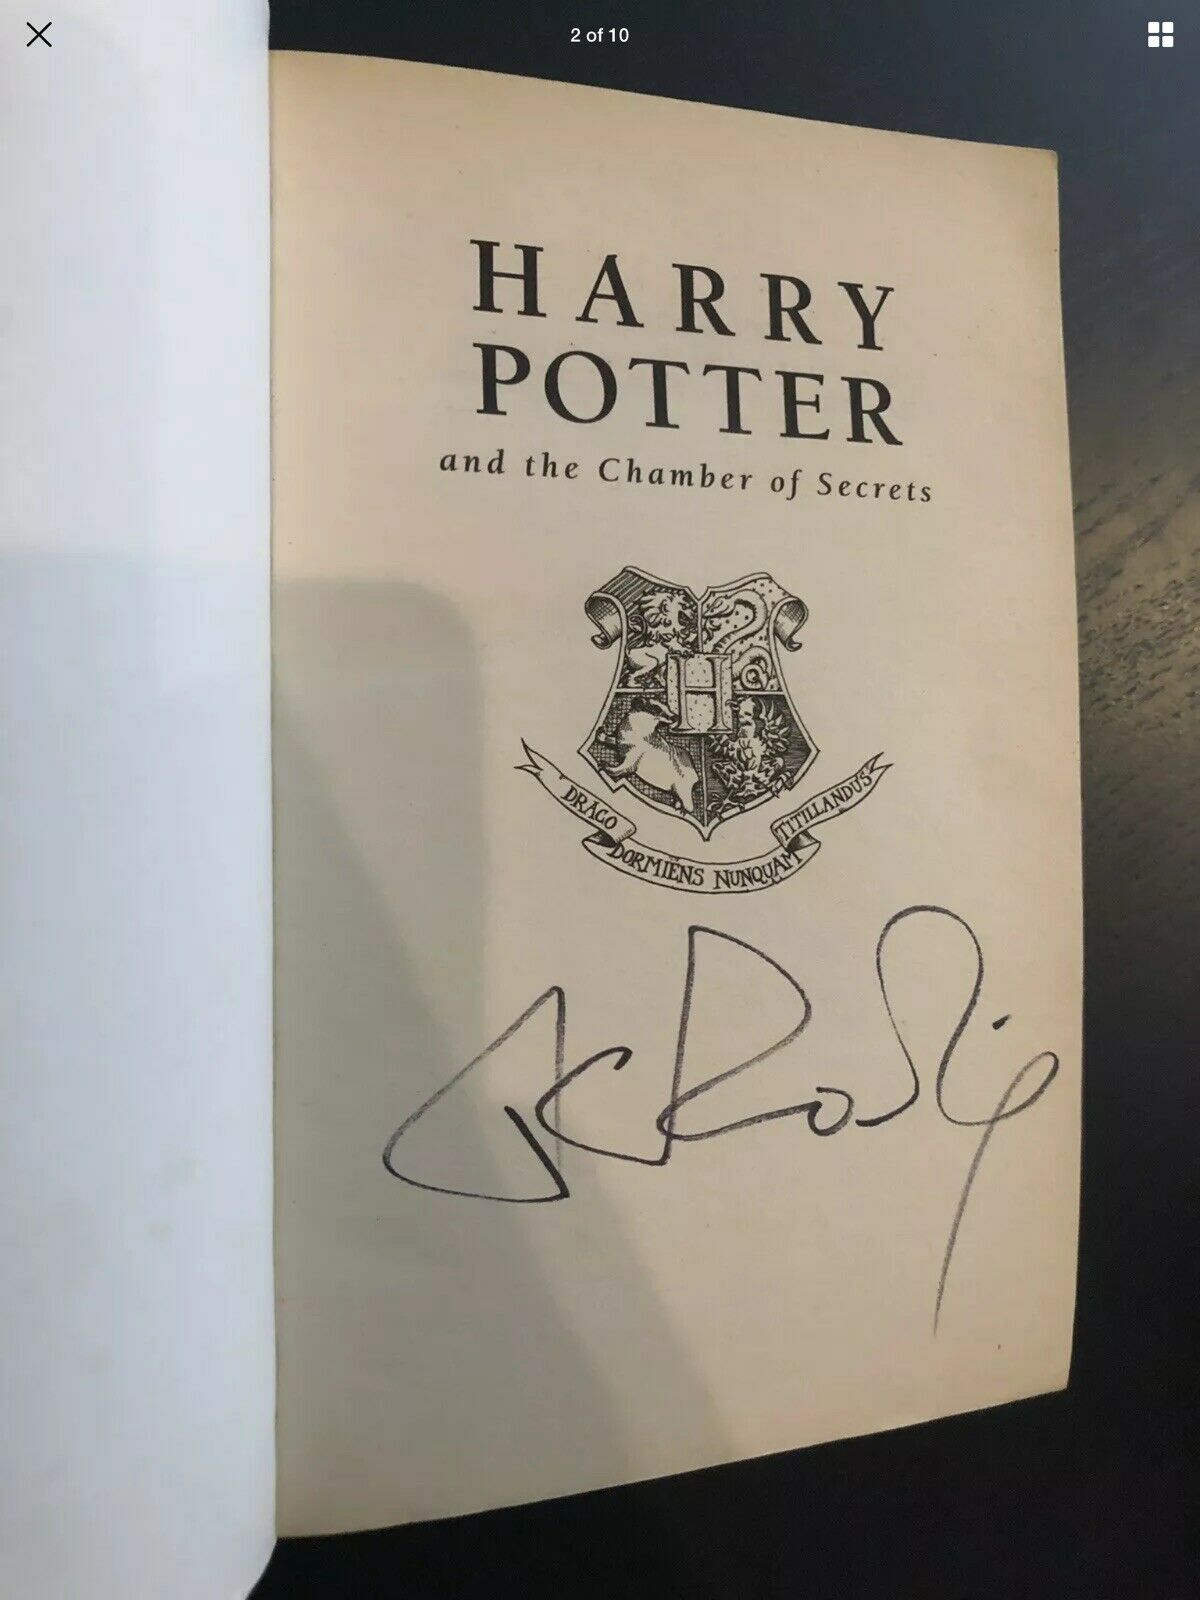 J.K. Rowling Forgery found on eBay inside a softcover Harry Potter and the Chamber of Secrets (published by Bloomsbury UK)